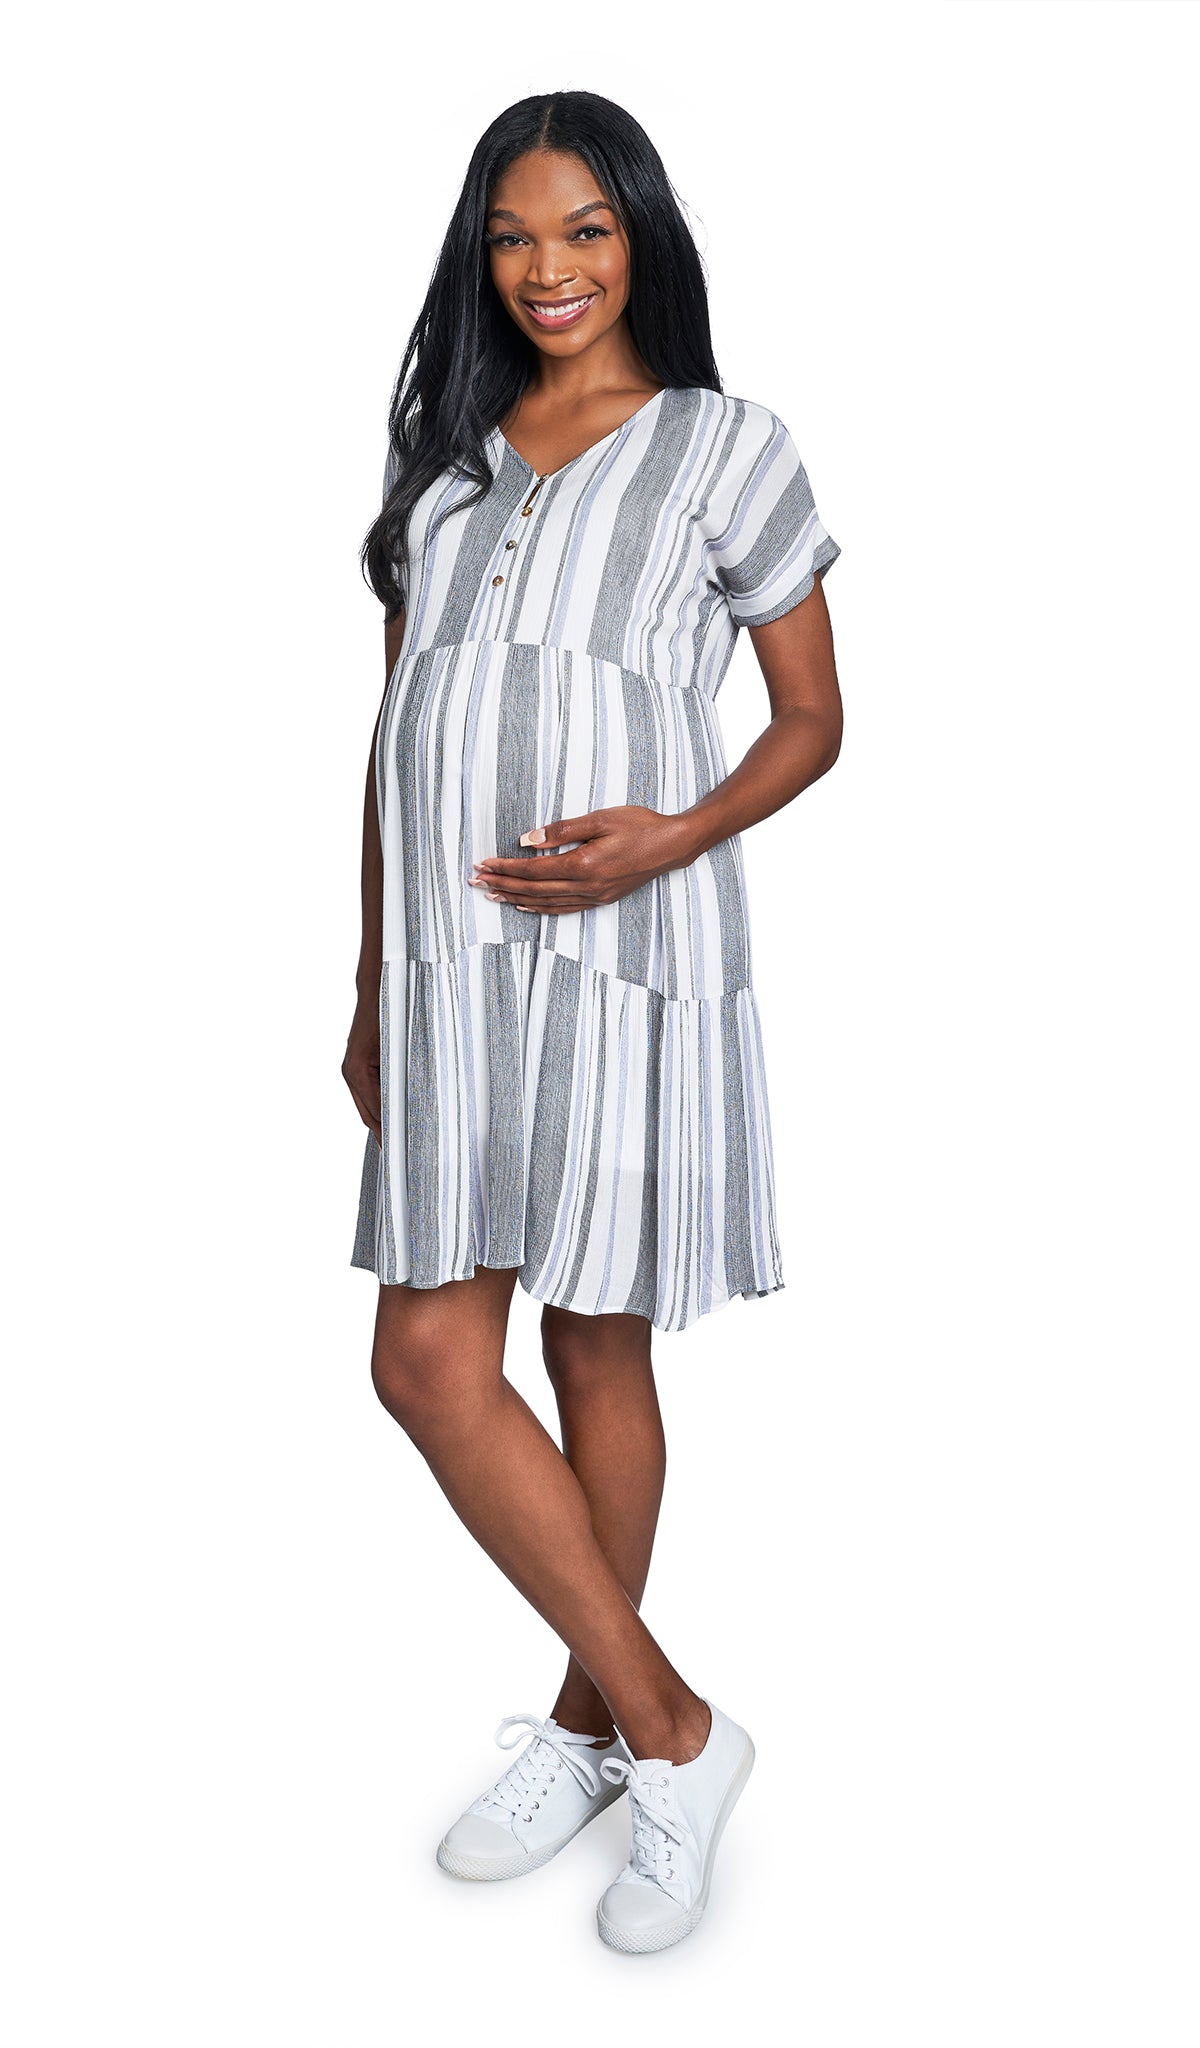 Black/Royal Micaela dress worn by pregnant woman with one hand on her belly.